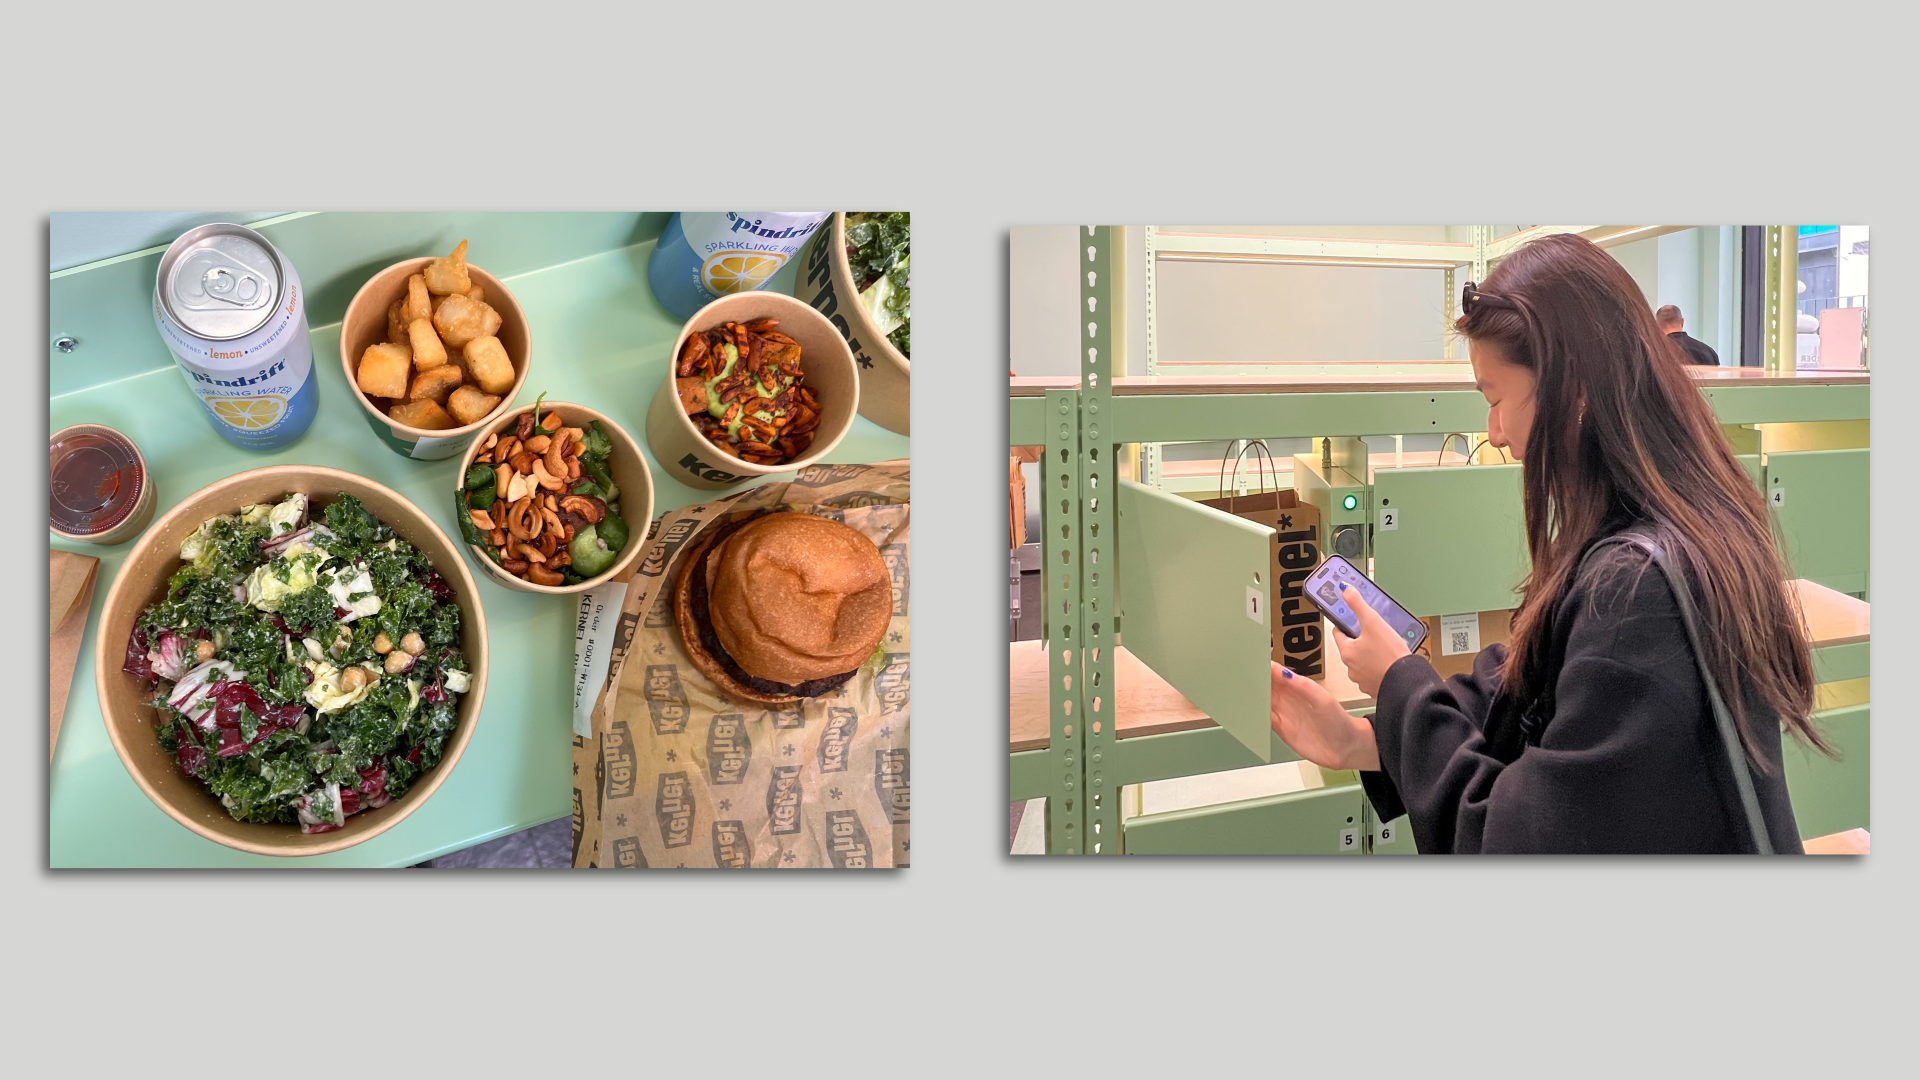 At left, a selection of vegan food from Kernel; at right, a customer picks up her food from a cubby.